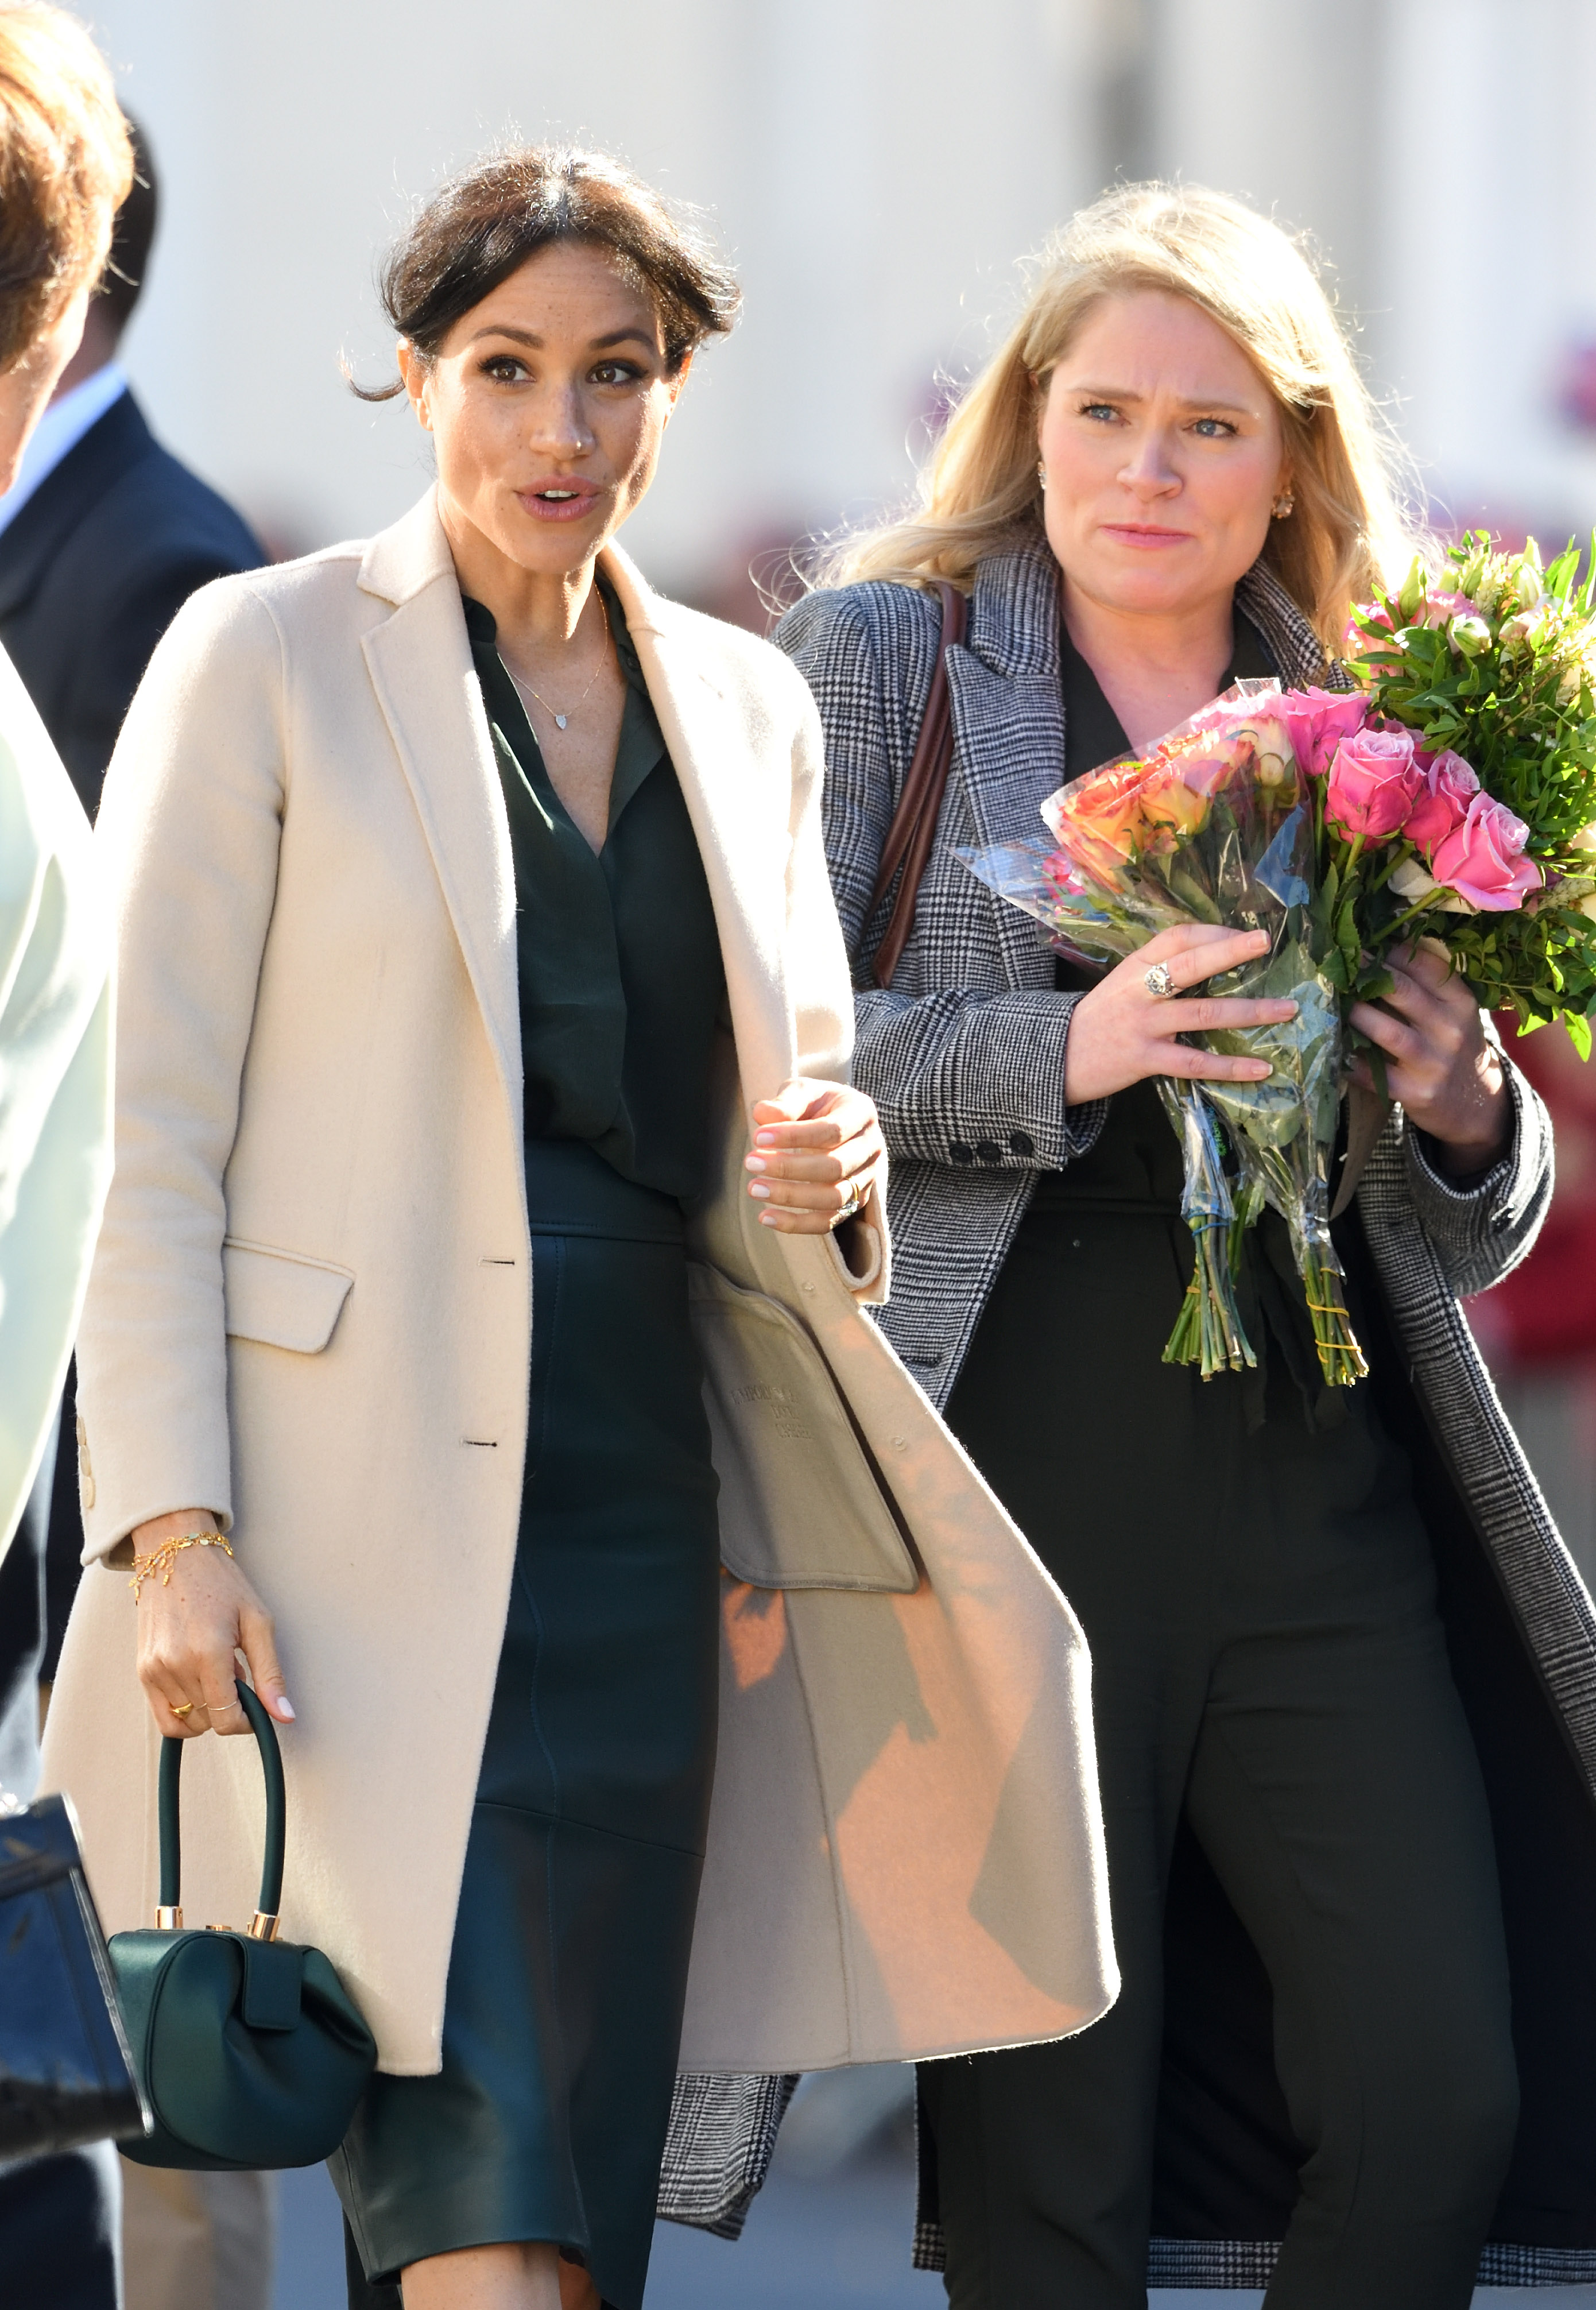 Meghan Markle and her assistant Amy Pickerill during an official visit to Sussex on October 3, 2018 in Chichester, United Kingdom | Source: Getty Images